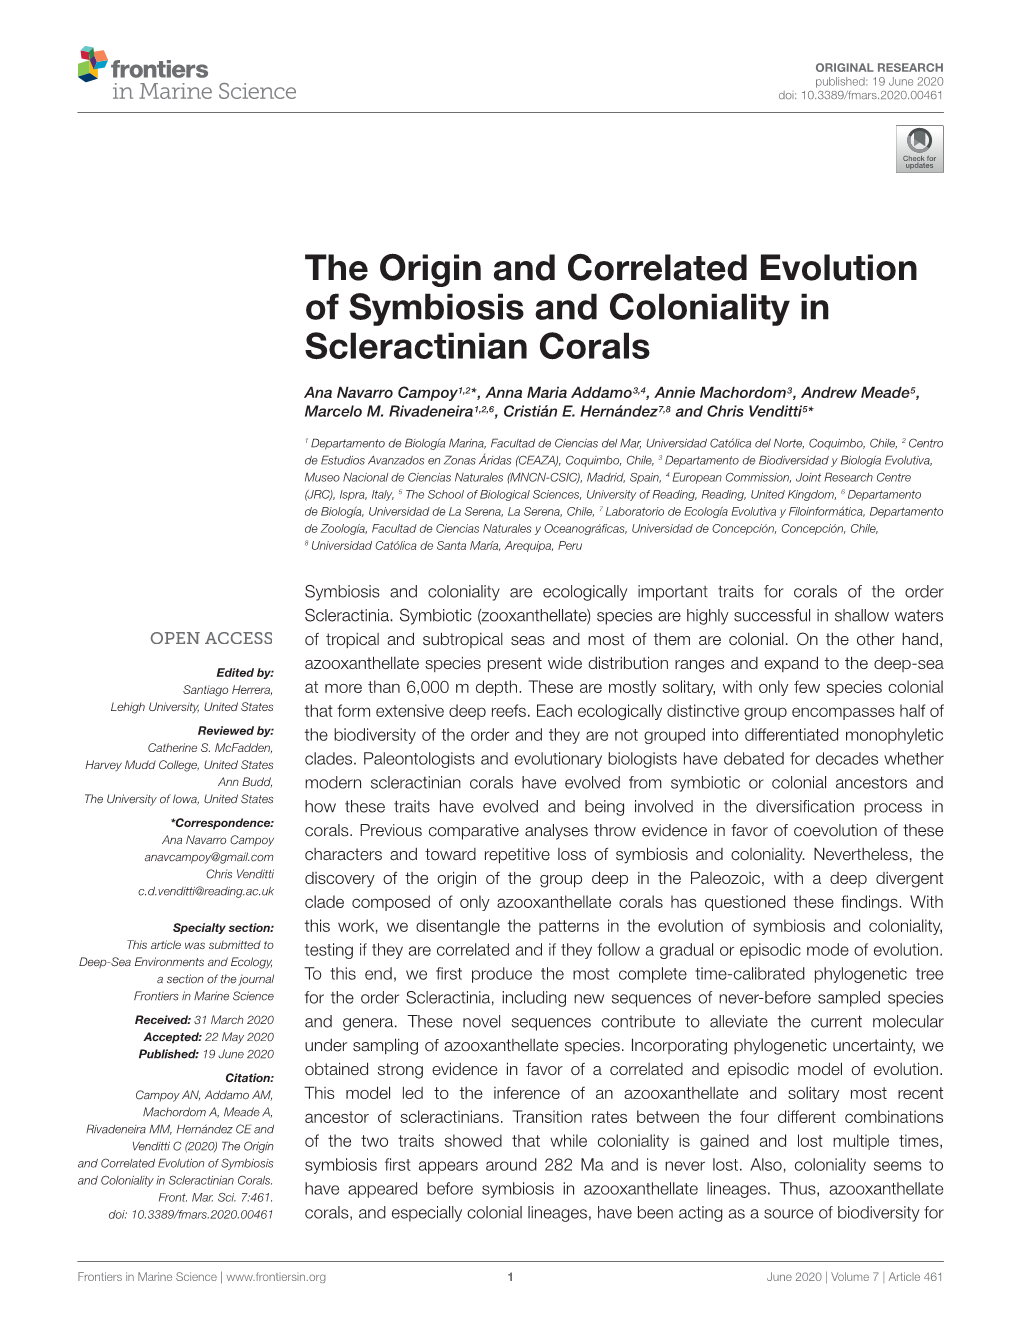 The Origin and Correlated Evolution of Symbiosis and Coloniality in Scleractinian Corals